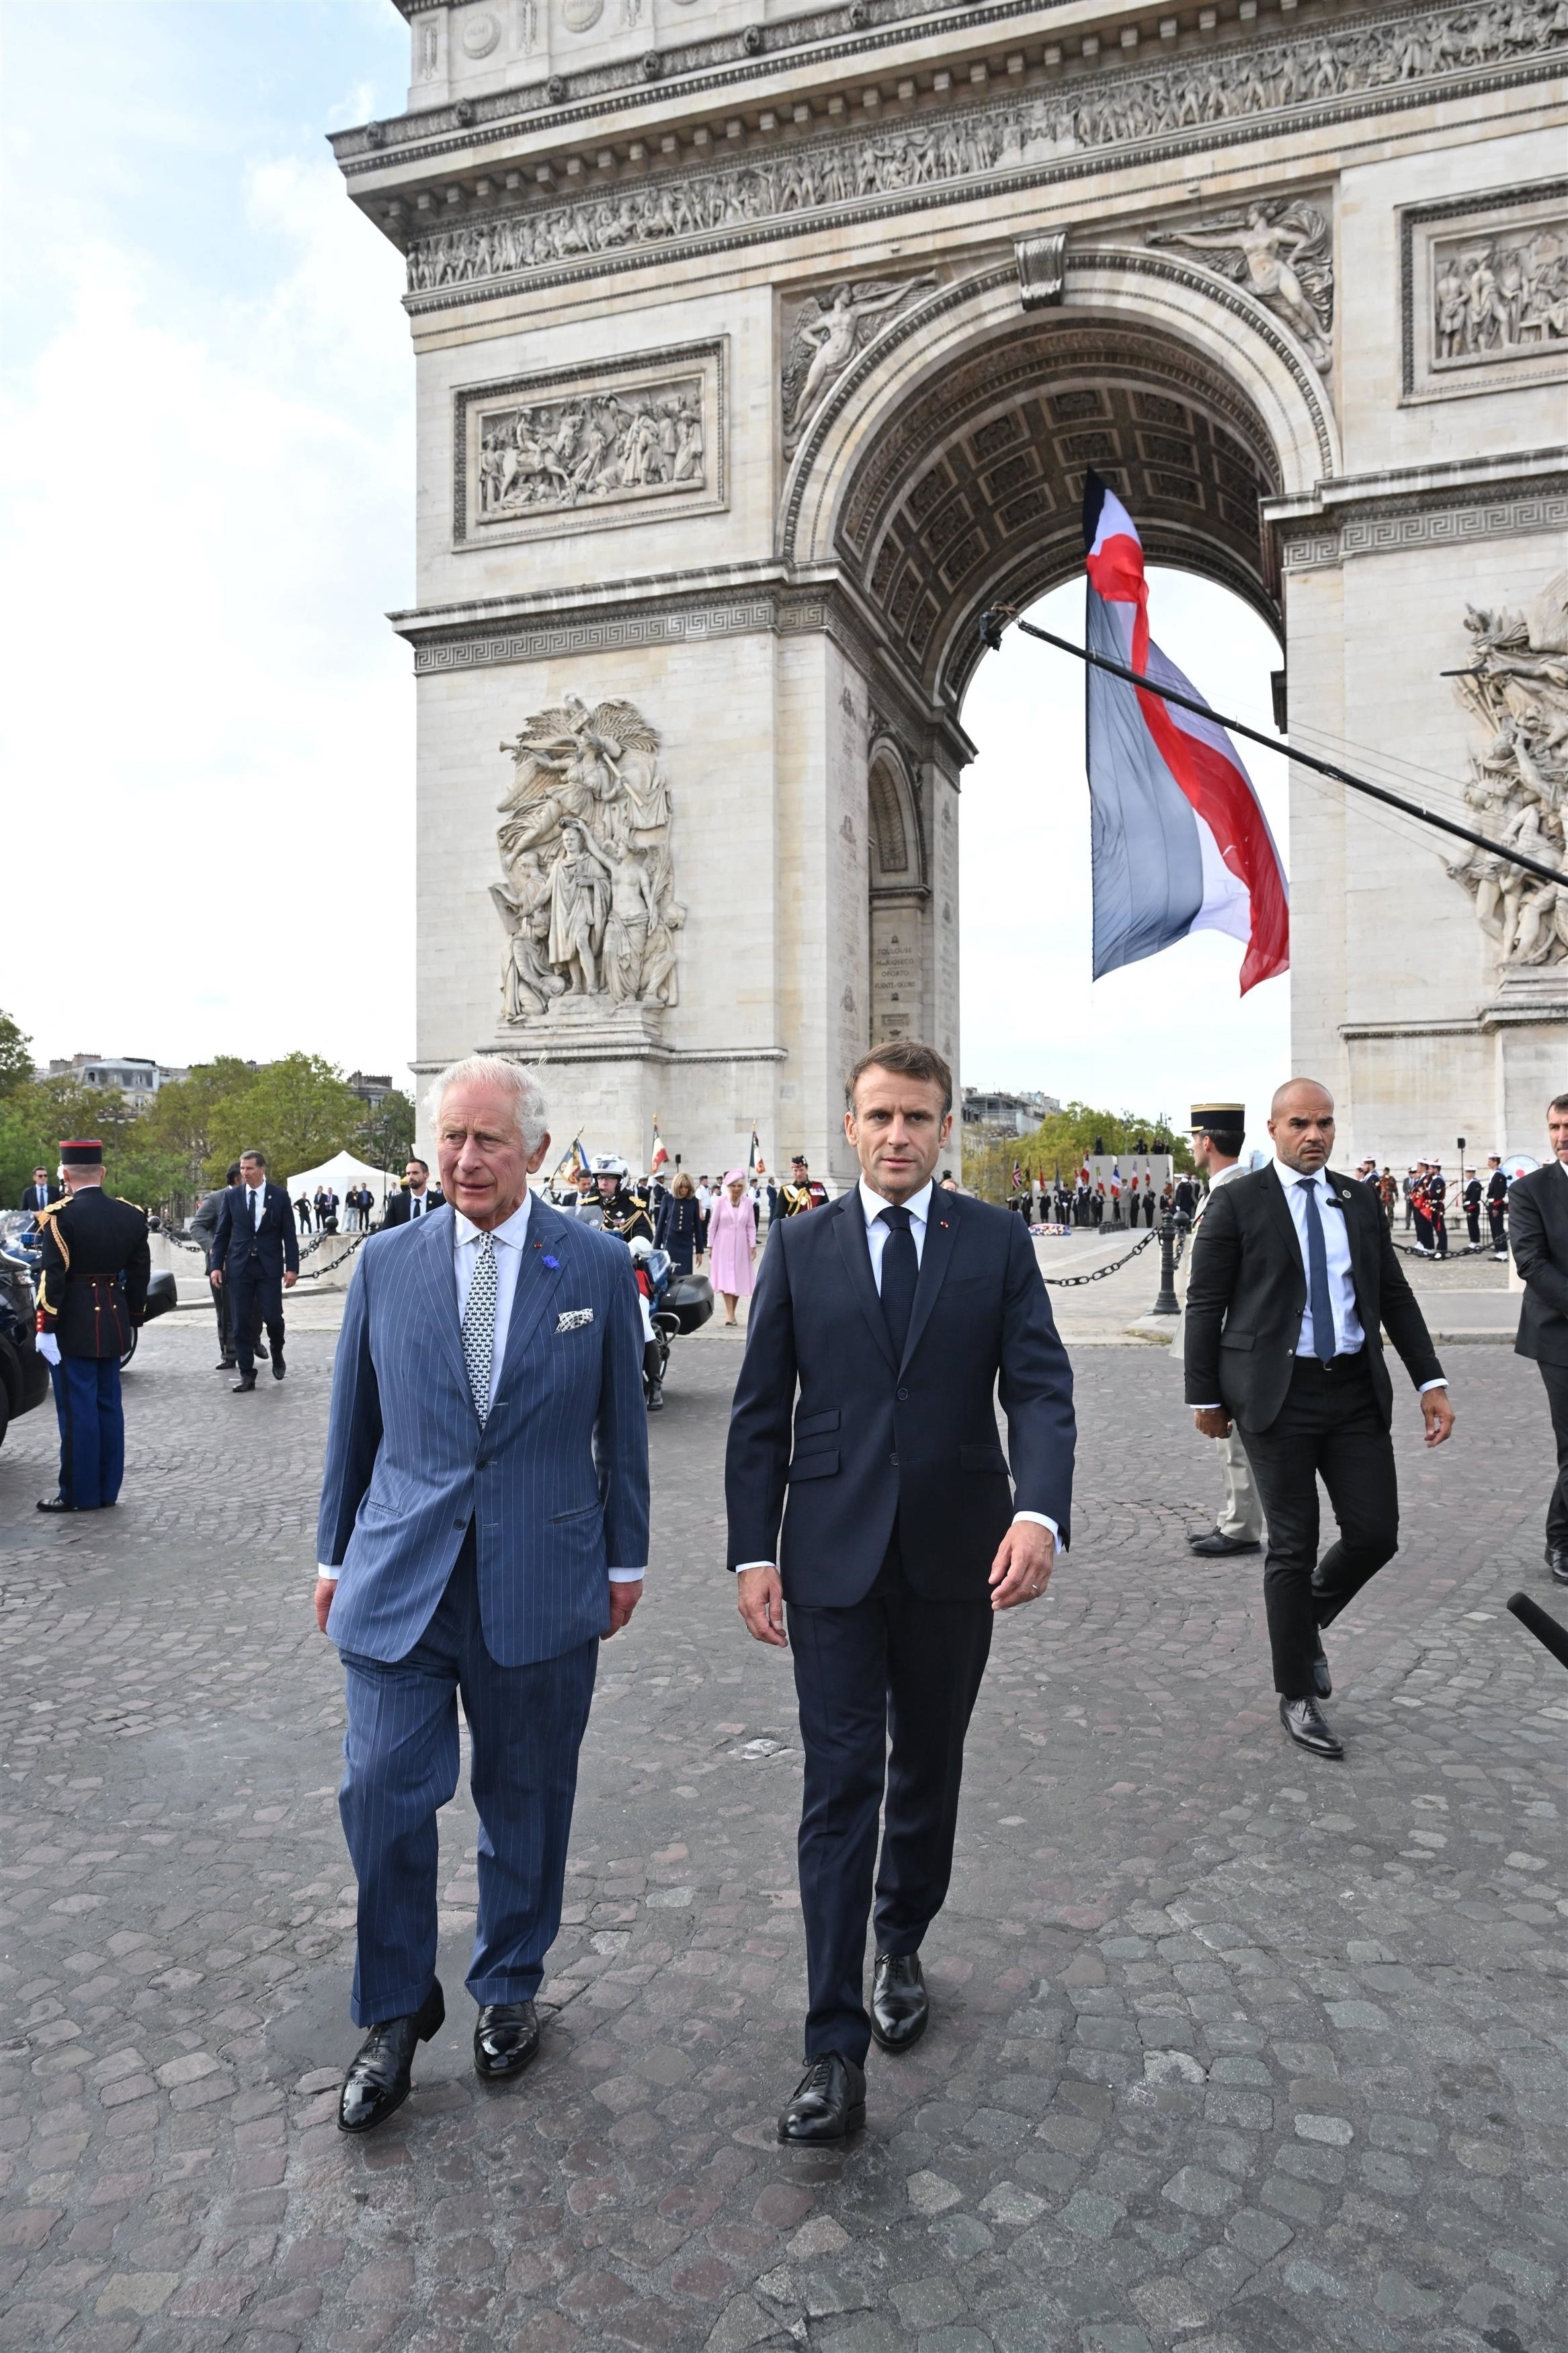 <p>King Charles III joined France's President Emmanuel Macron at an official welcoming ceremony at the Arc de Triomphe in Paris on Sept. 20, 2023, the first day of <a href="https://www.wonderwall.com/entertainment/king-charles-iii-and-queen-camilla-in-france-see-the-best-photos-from-the-royals-official-state-visit-791038.gallery">the British monarch's state visit to France</a>.</p>